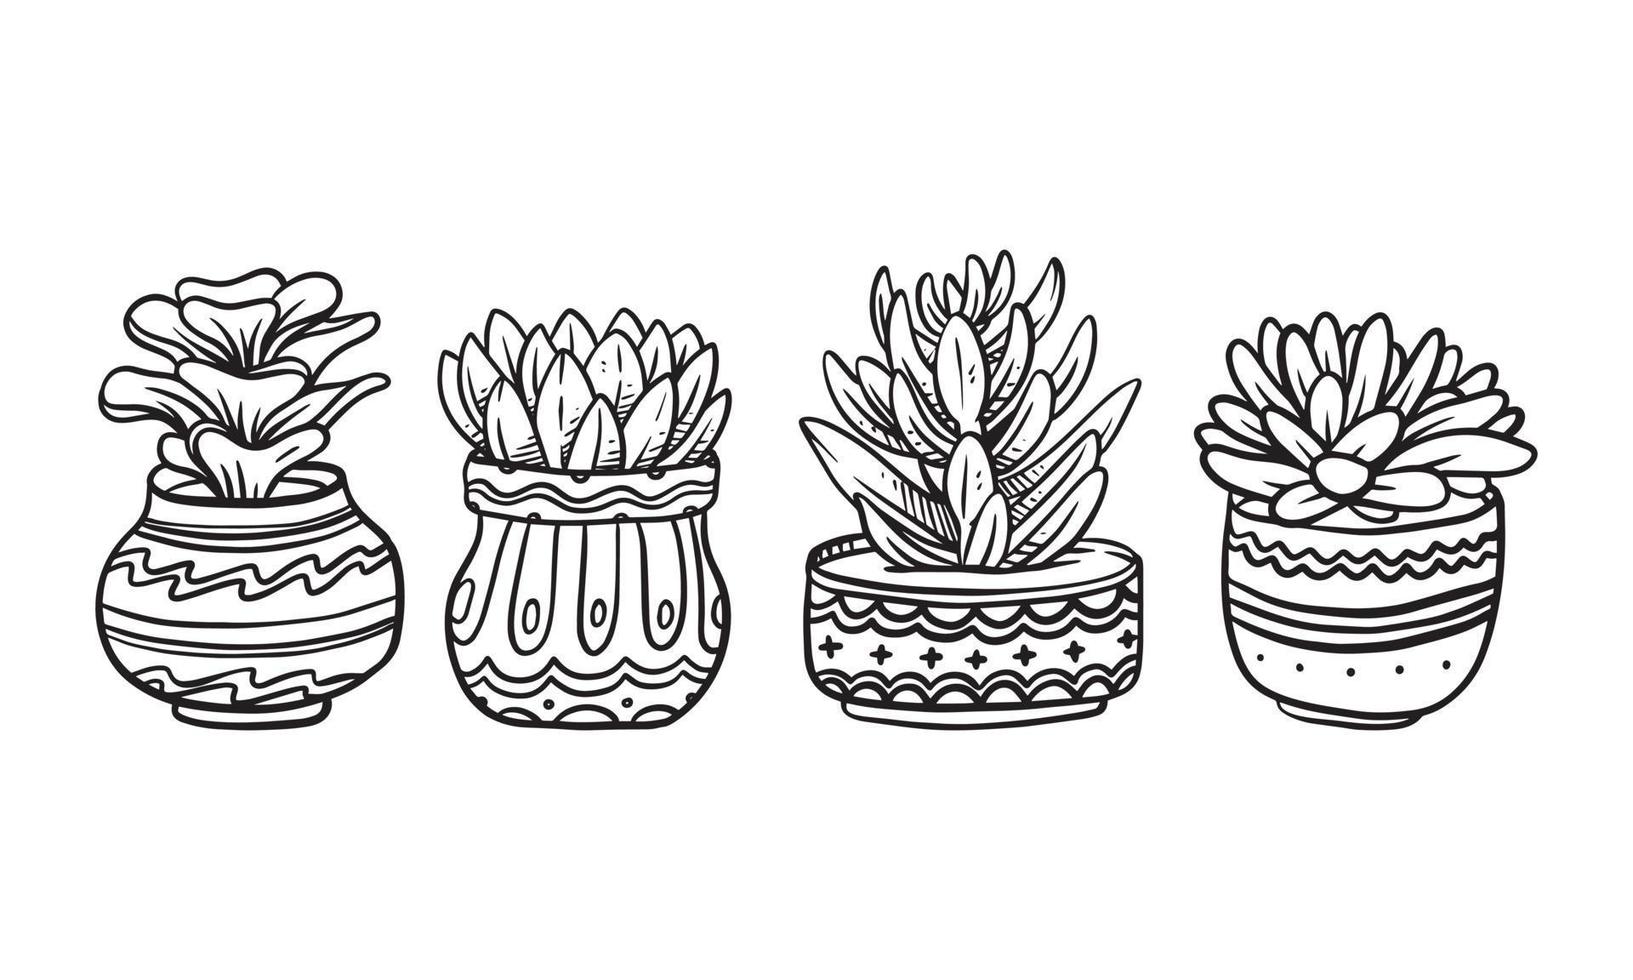 Set of Potted plant hand drawn vector illustration, plant isolated graphic elements for design, Succulent plant with leaves illustration to create romantic or vintage design.